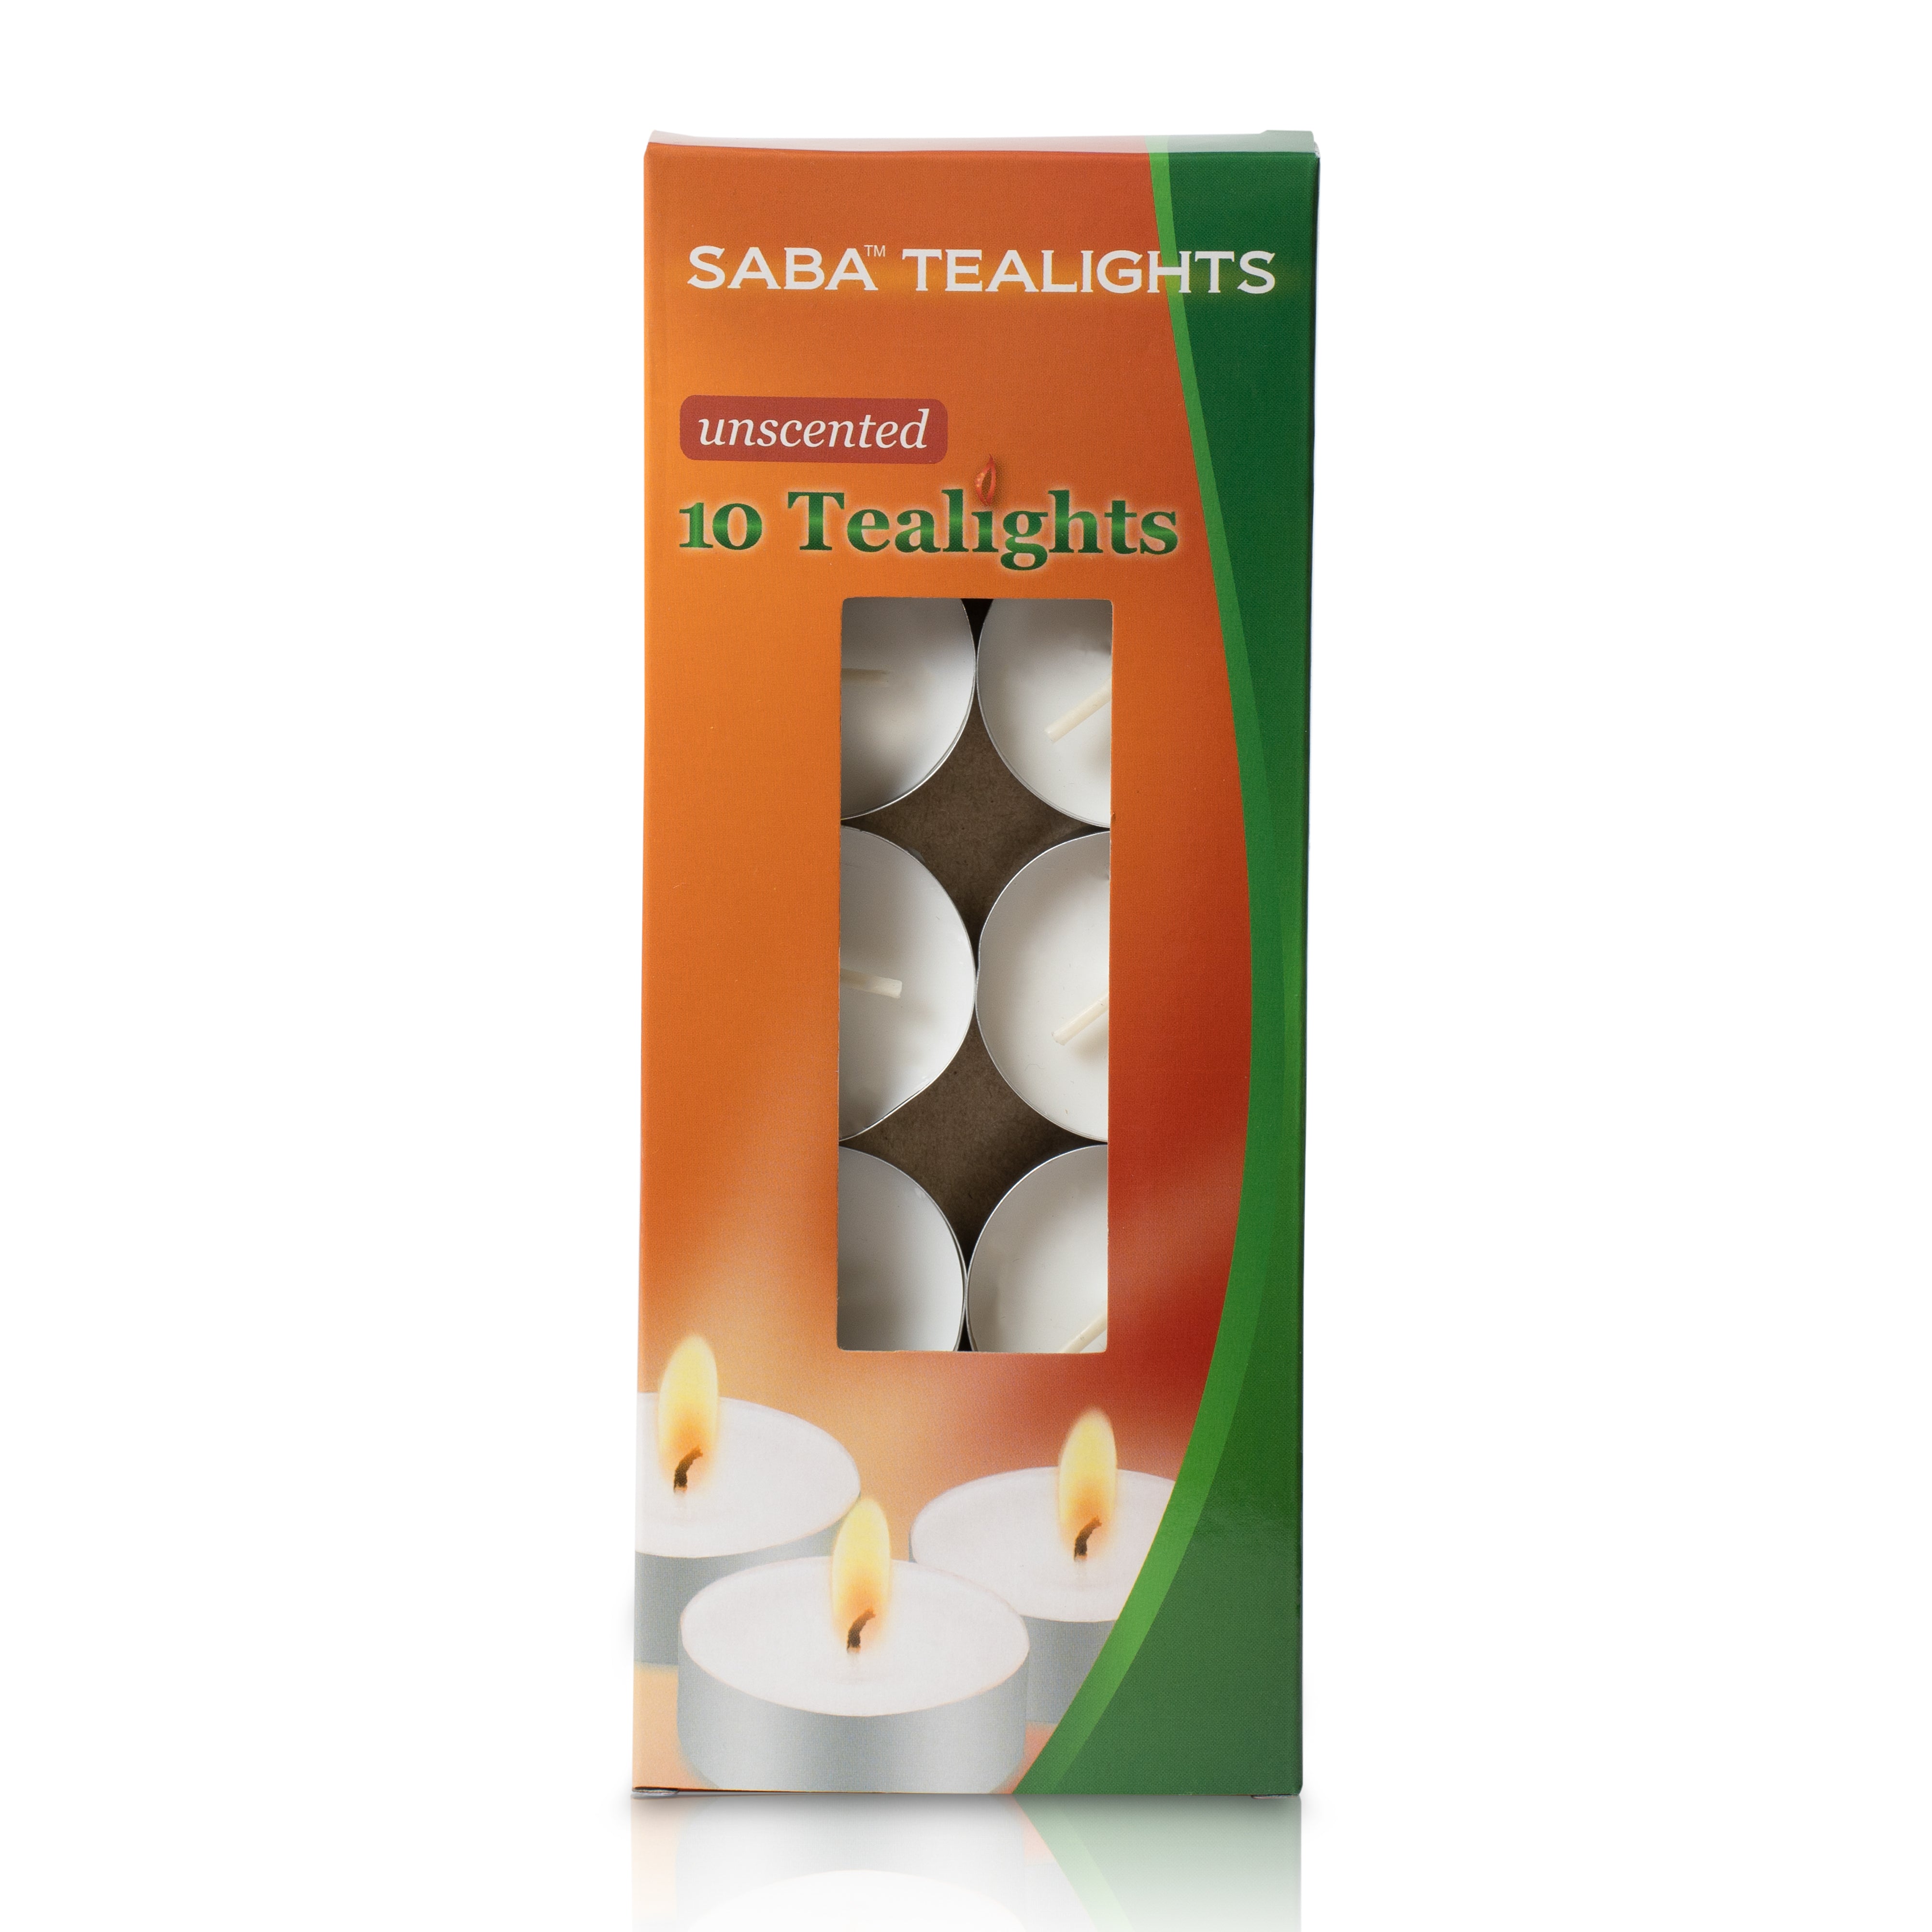 SABA Tealights - "White Unscented" - 10 Pack- Made in USA (20 Count)